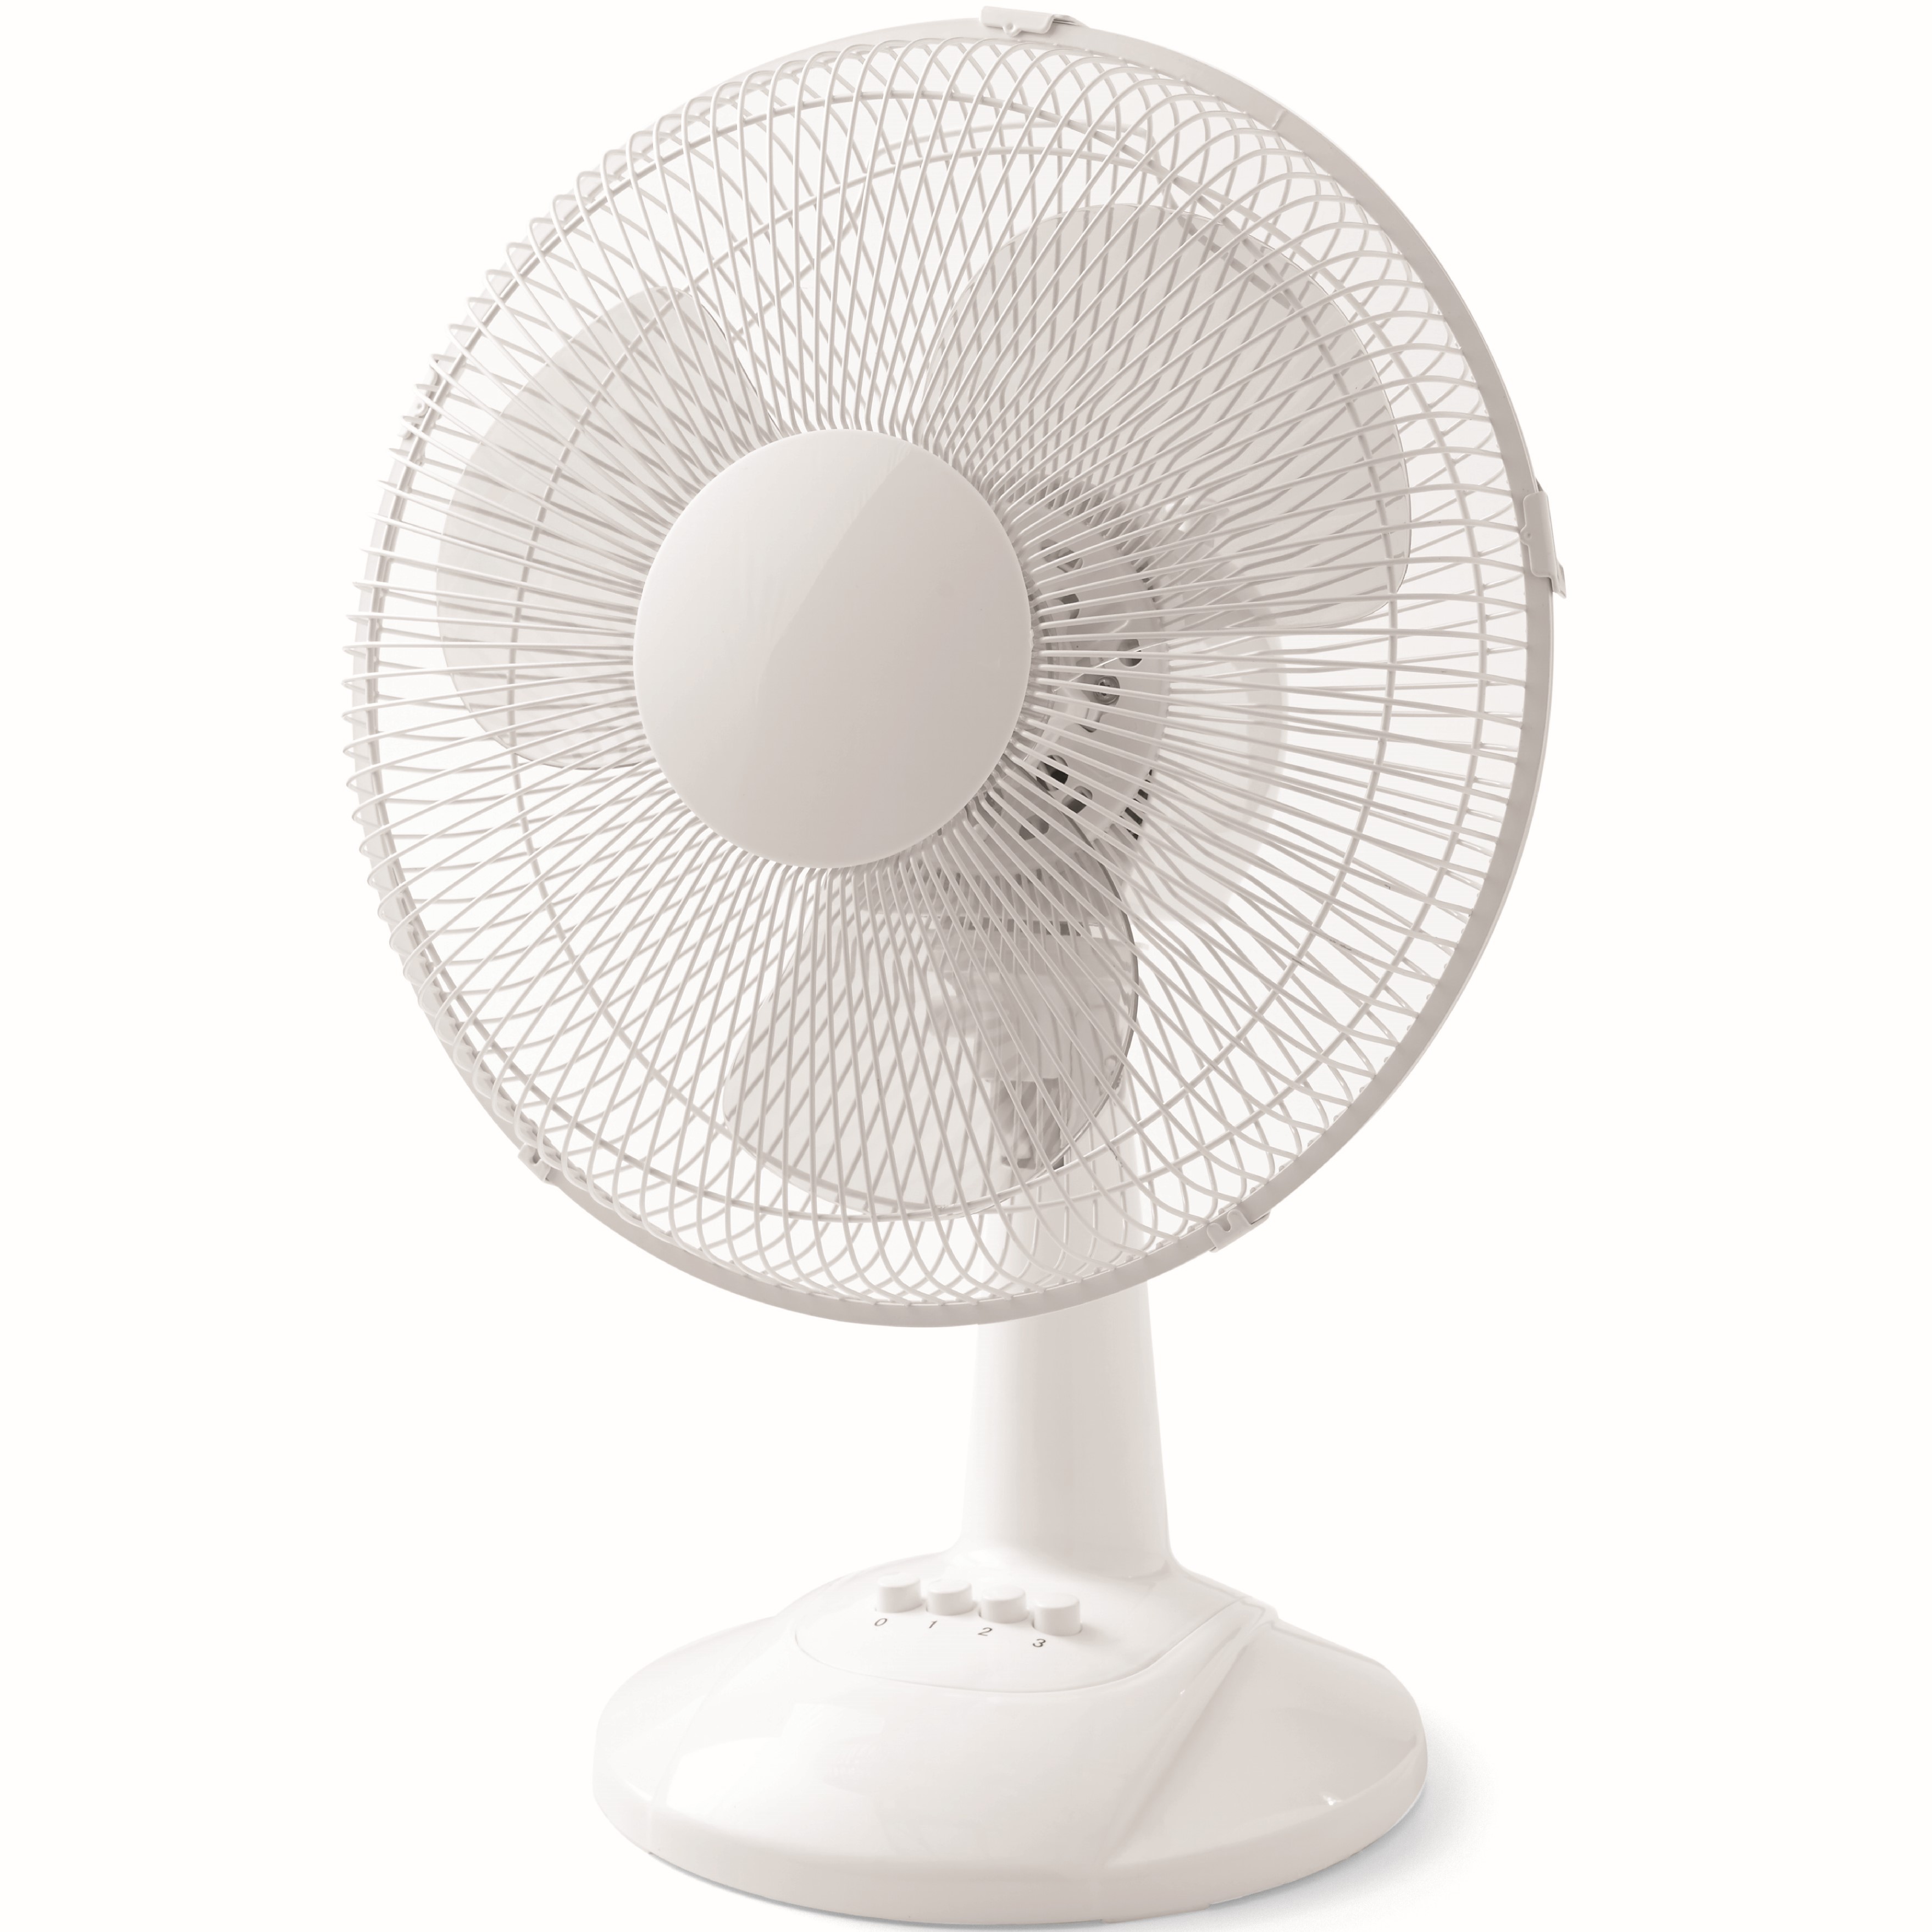 Mainstays 12" 3-Speed Oscillating Table Fan, FT30-8MBW, New, White - image 1 of 8